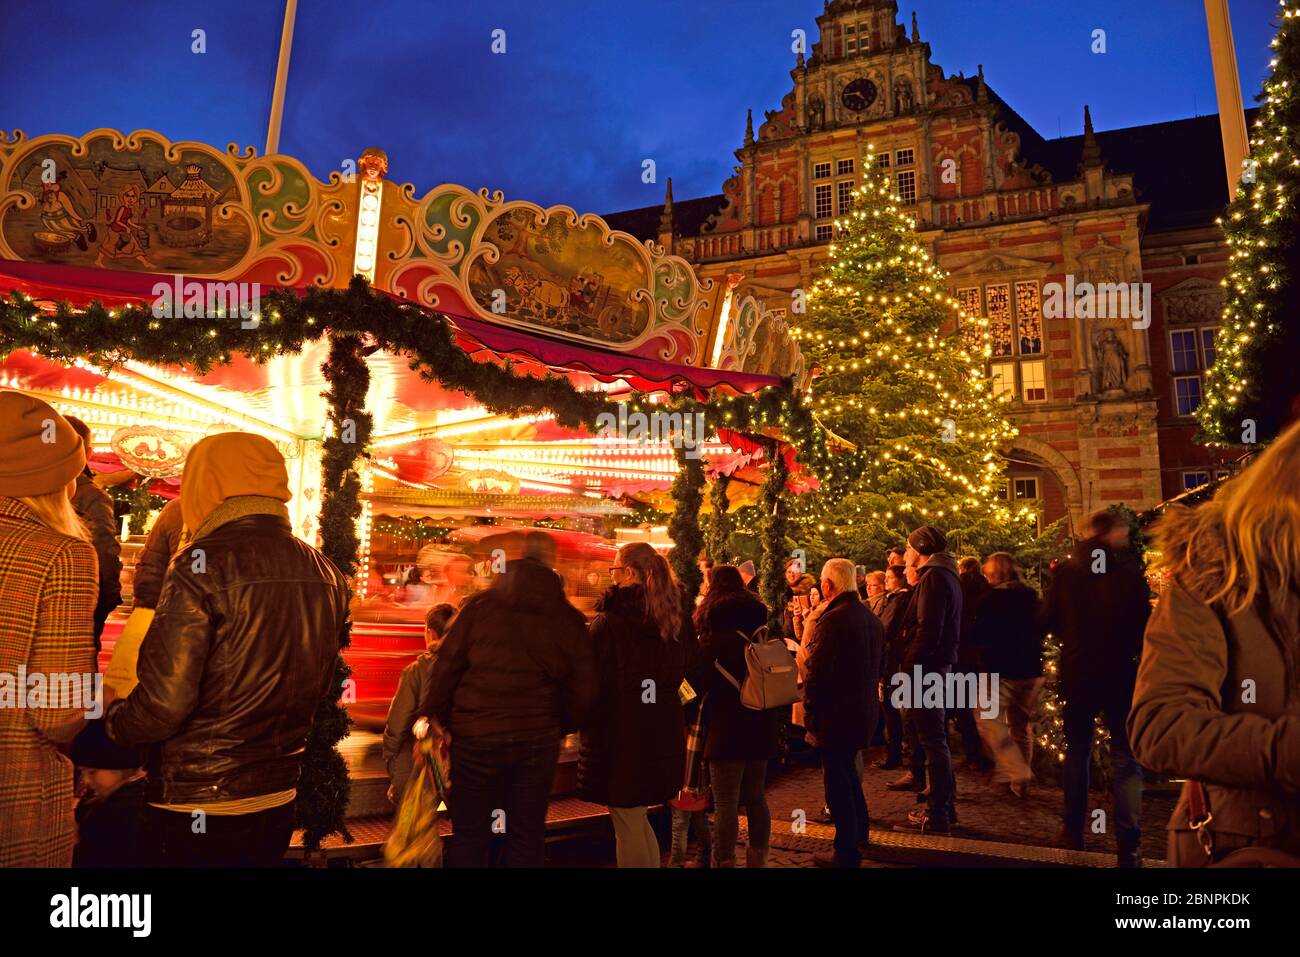 Europe, Germany, Hamburg, Harburg, Christmas market in front of the town hall, children's carousel, Stock Photo